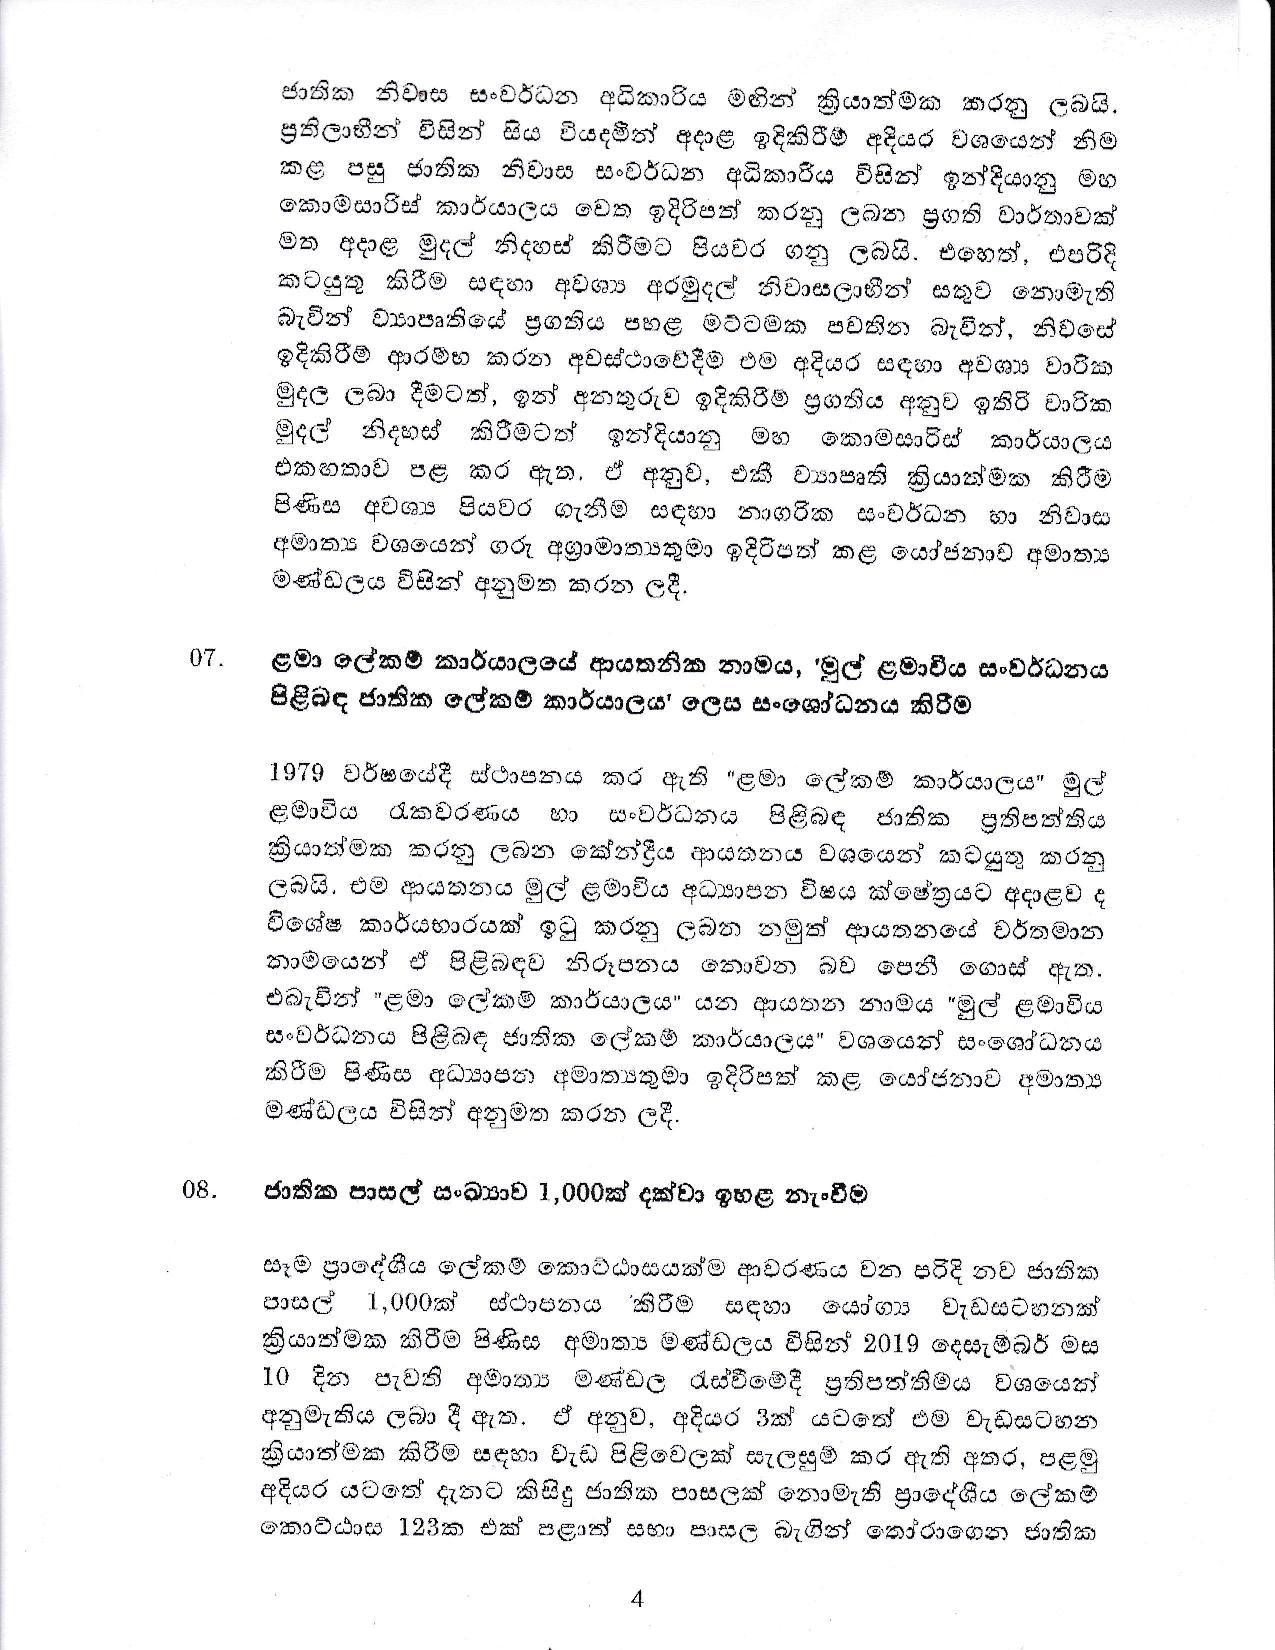 Cabinet Decision on 07.12.2020 page 004